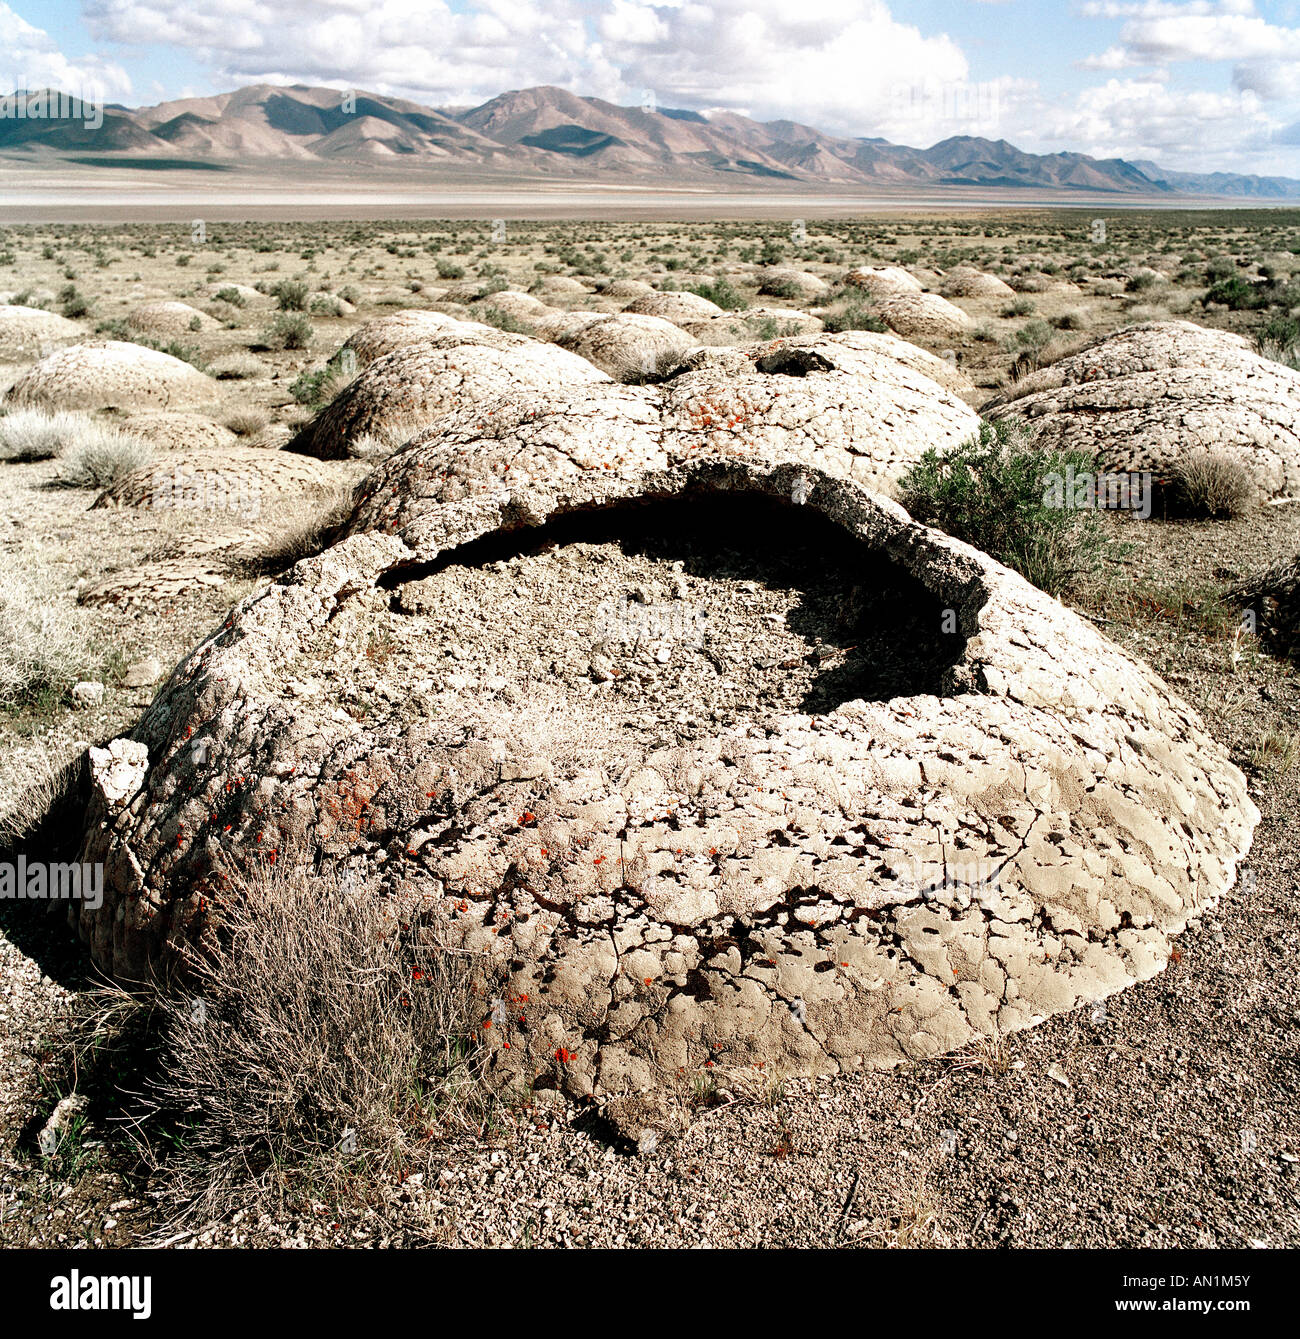 USA, Nevada. Tufa formations, made of calcium carbonate deposits, south of Gerlach, Nevada. Stock Photo